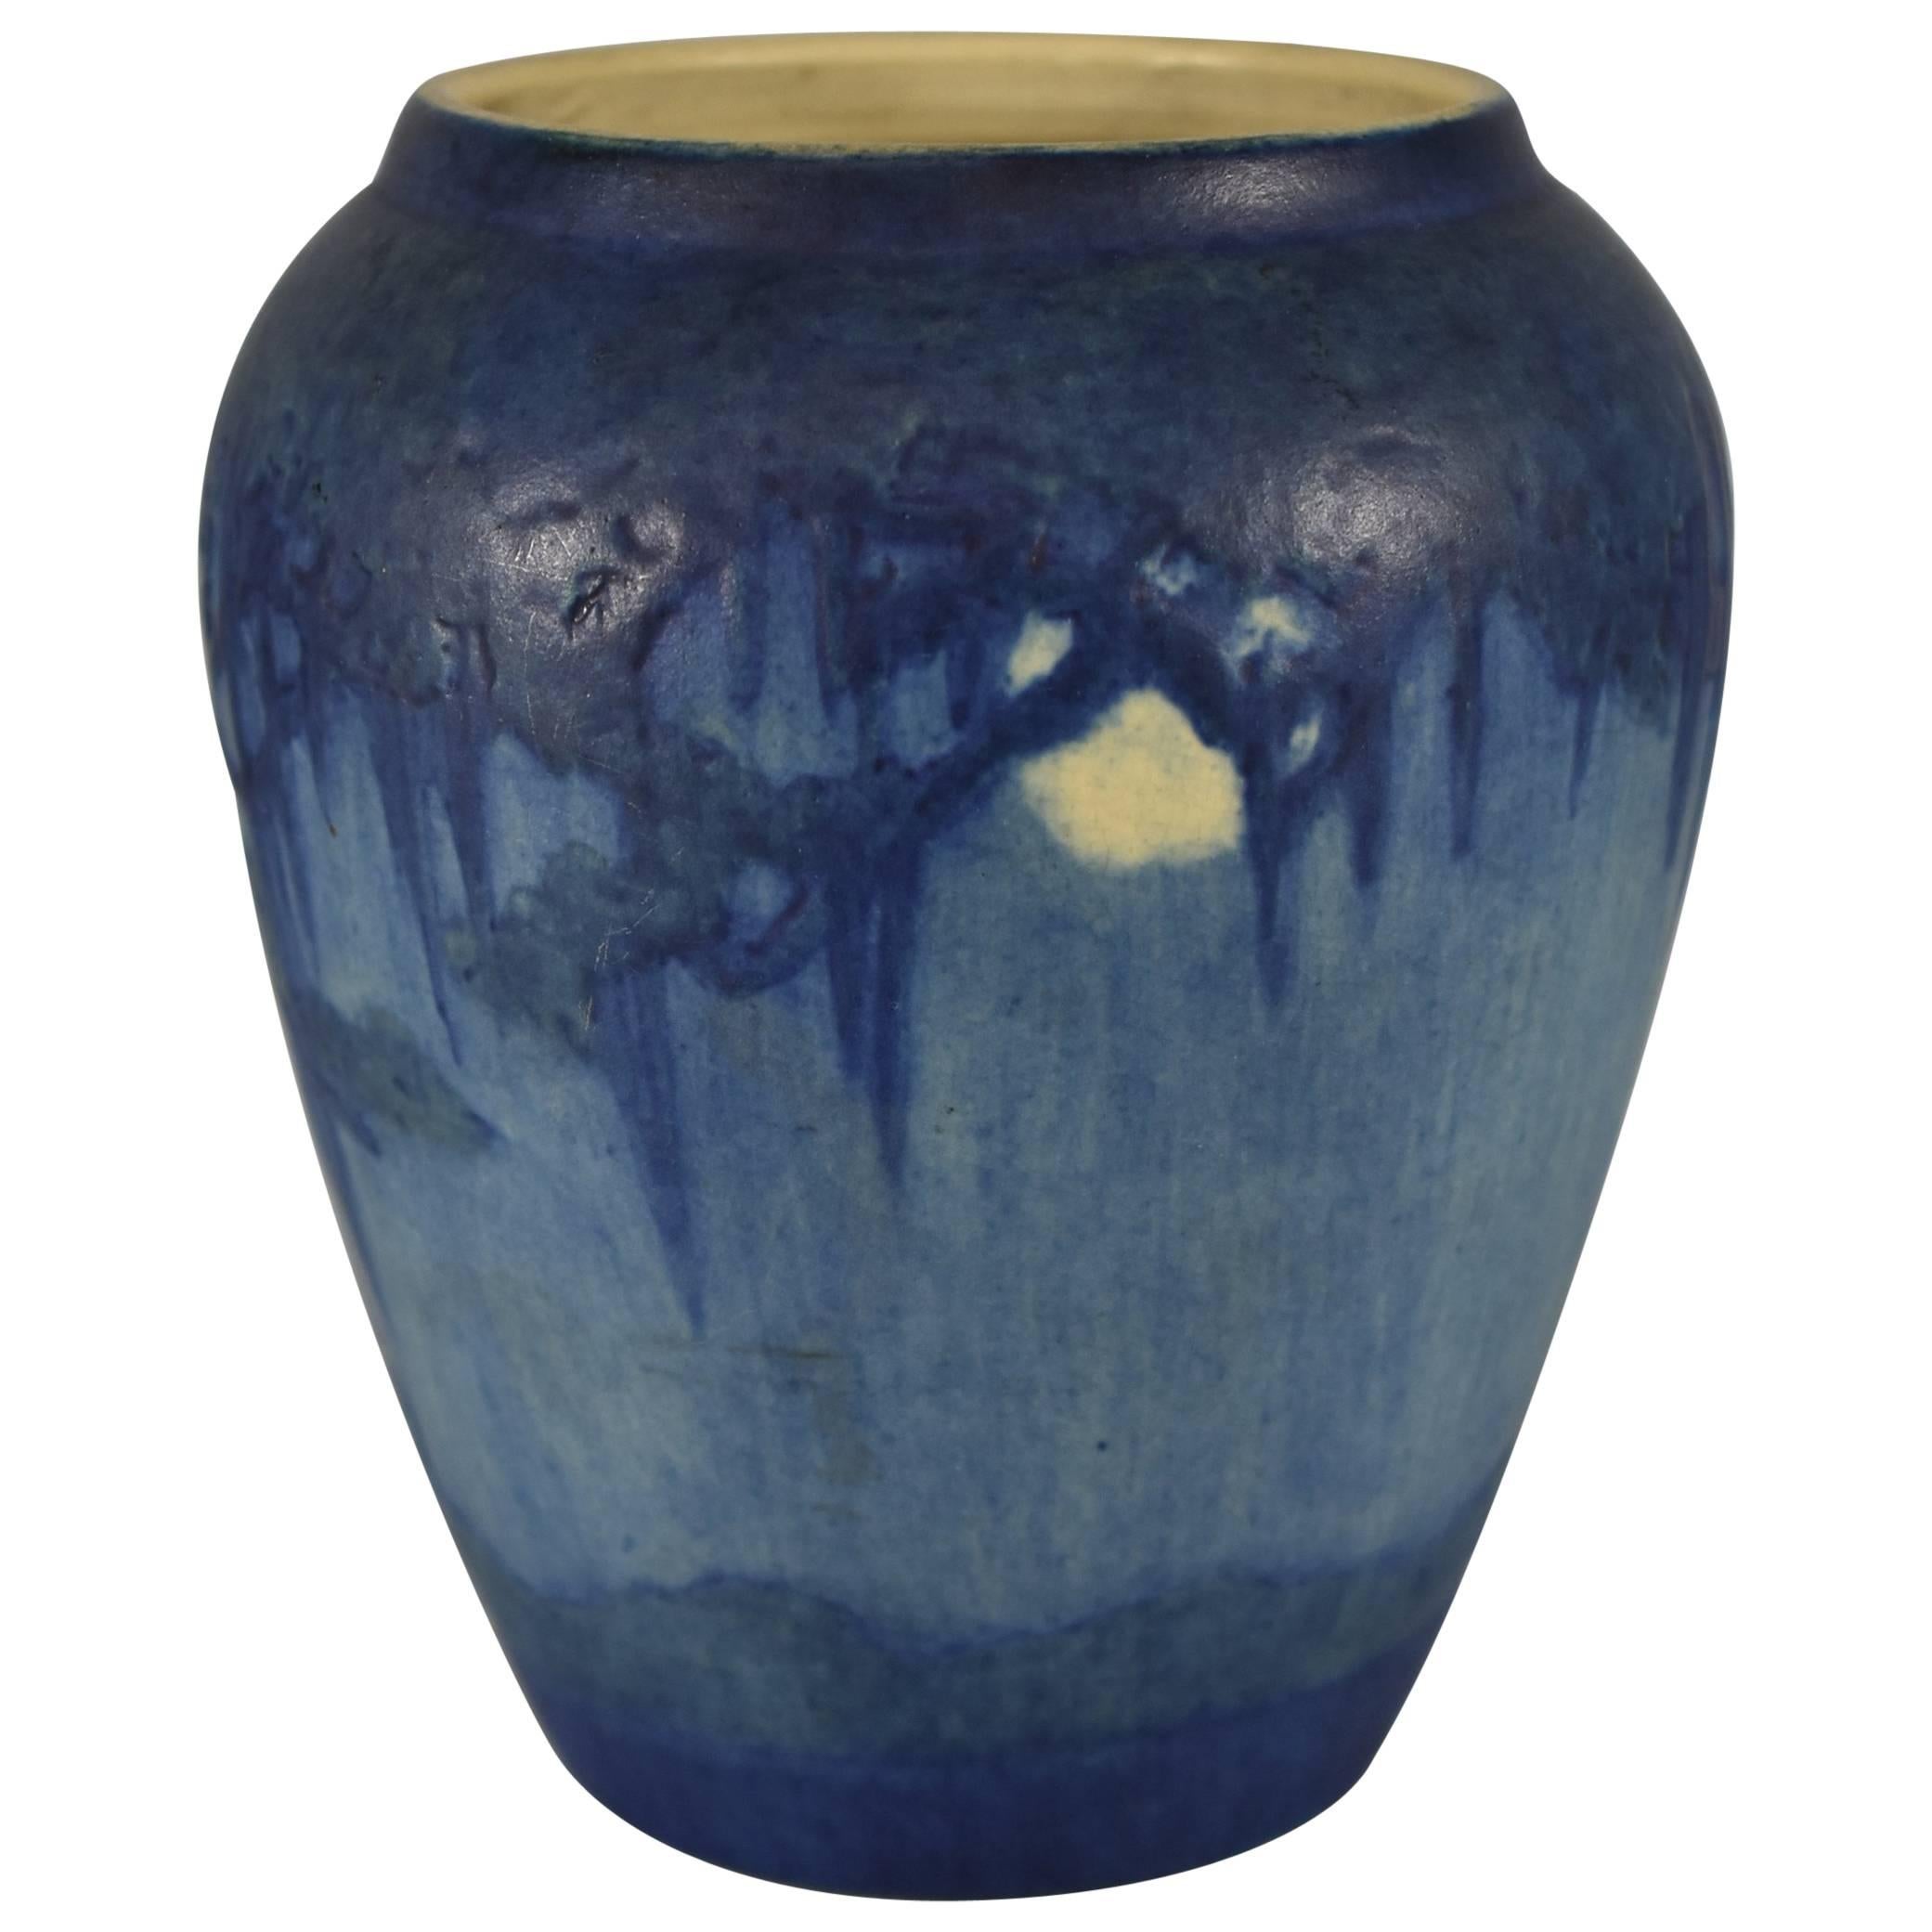 Newcomb College Vase Signed by Artist Henrietta Bailey